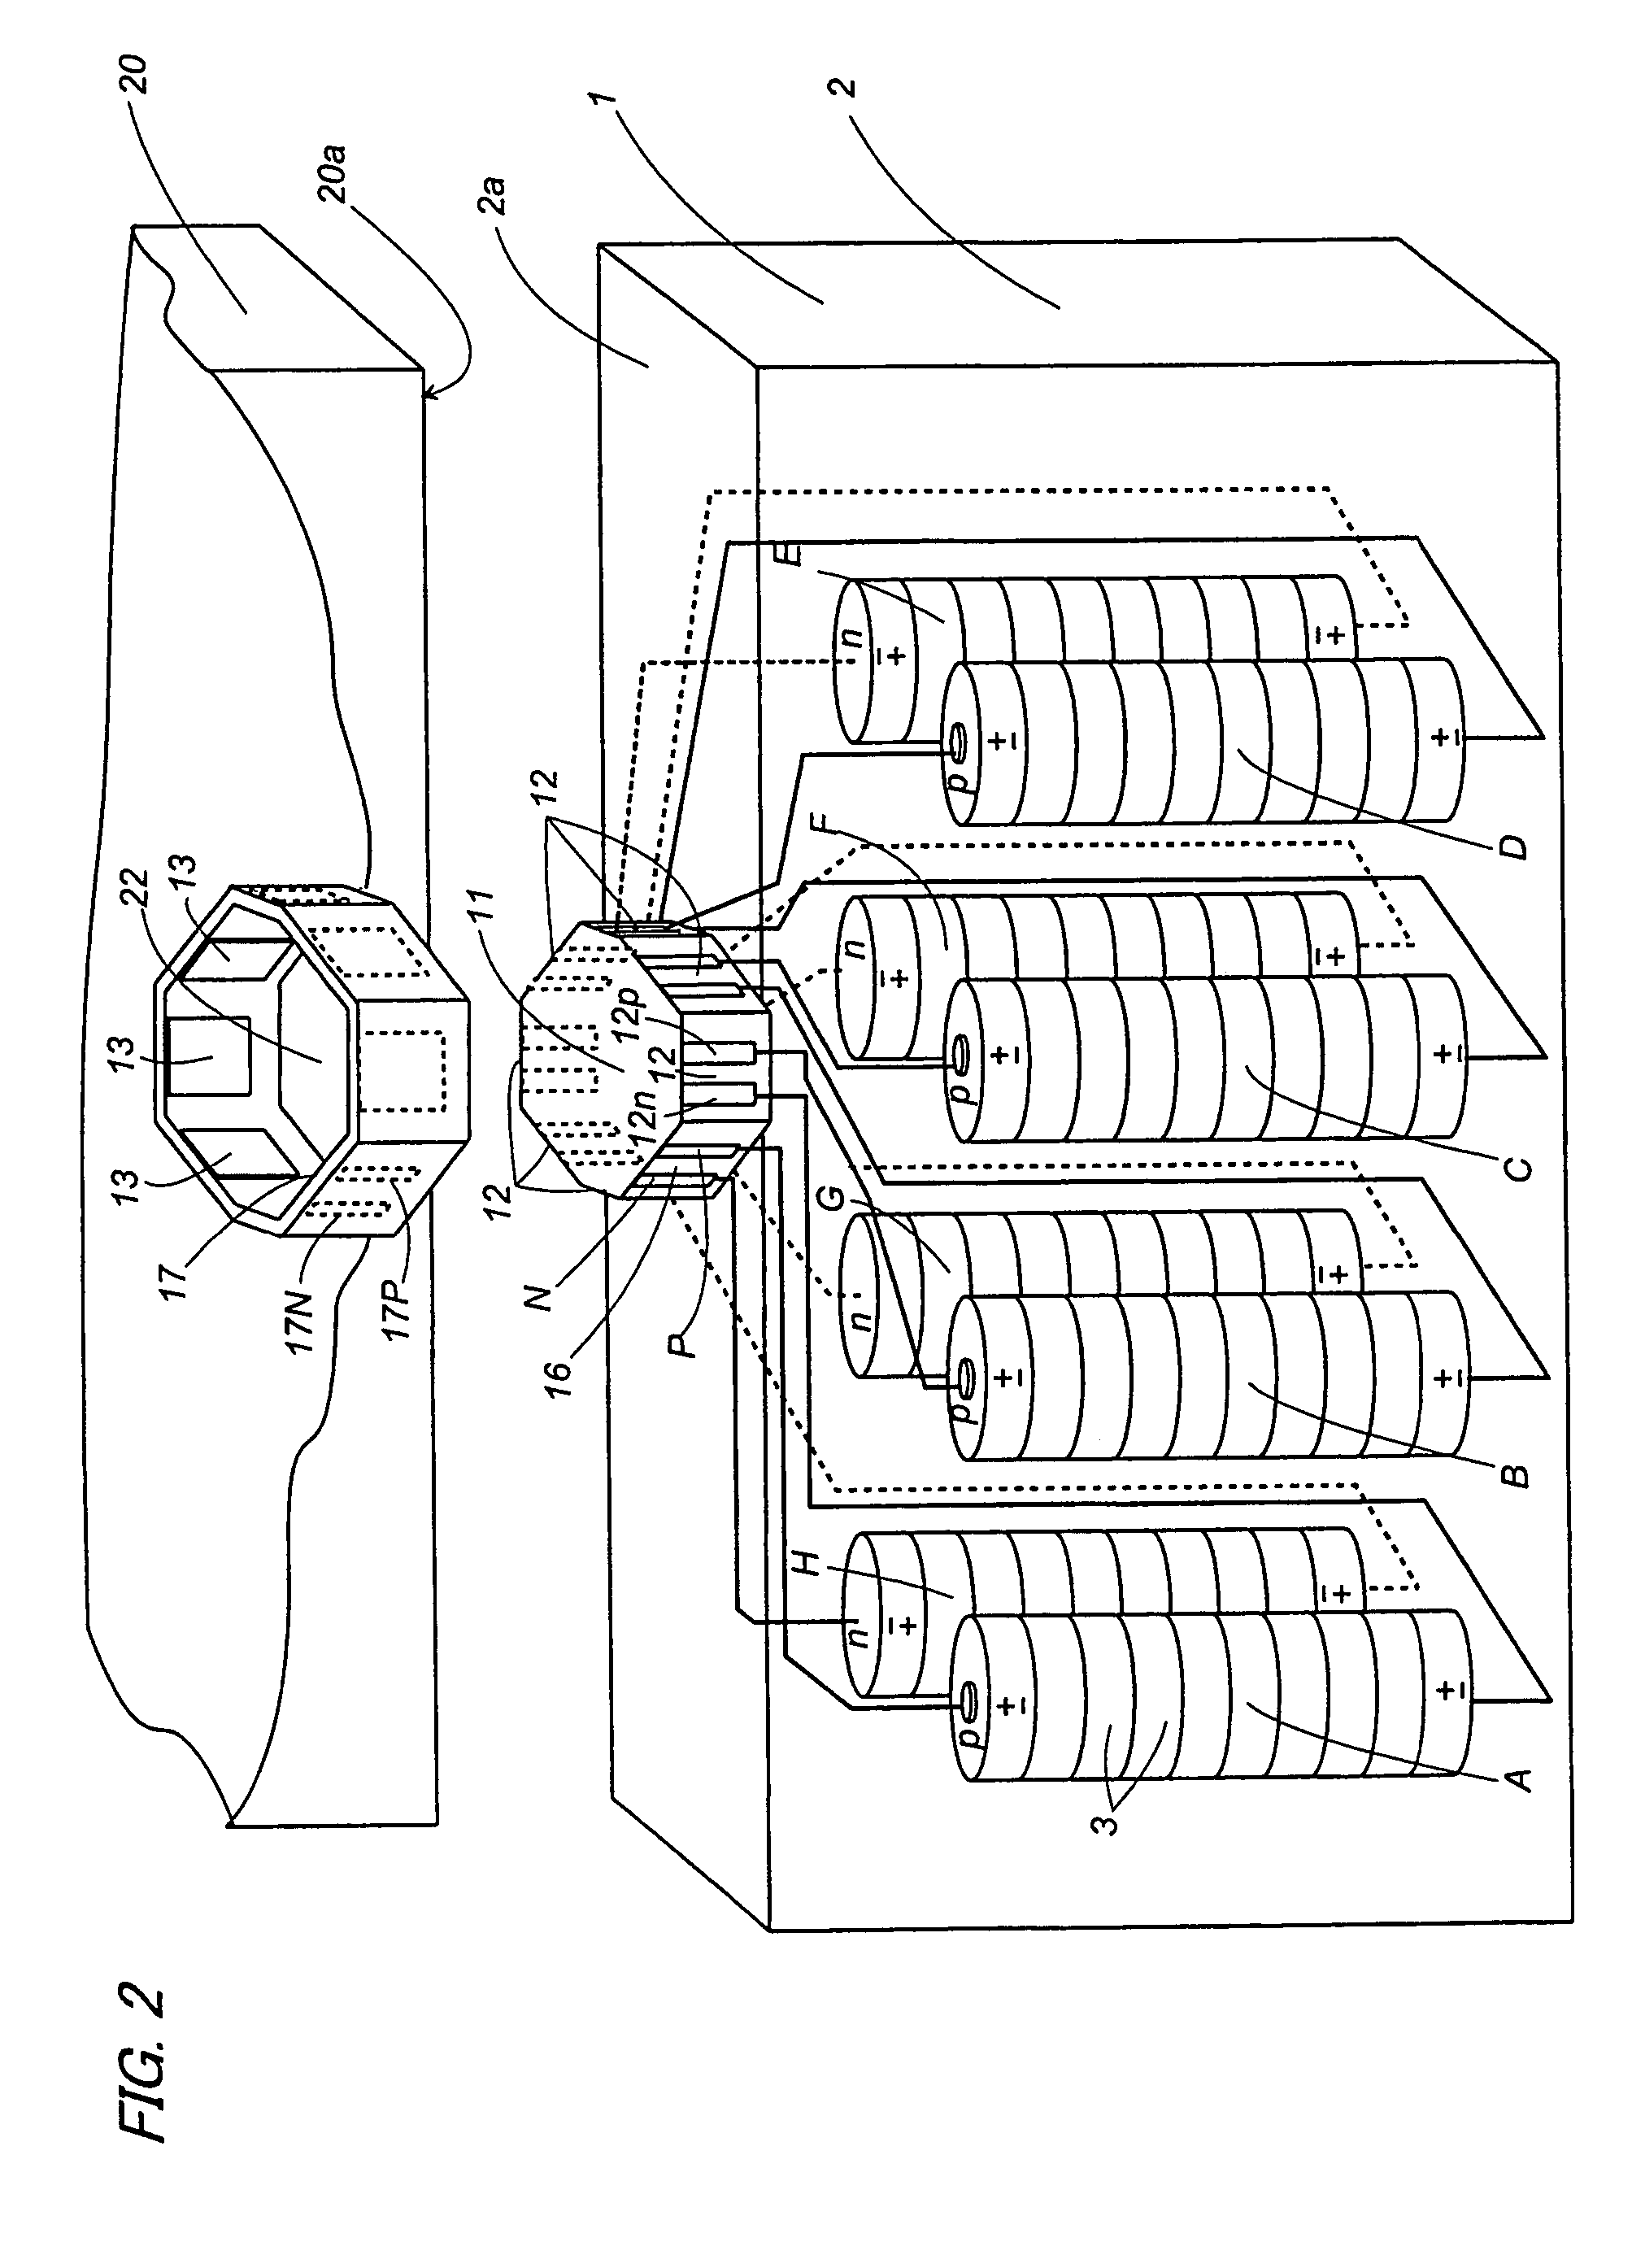 Battery-powered electrical device having a detachable battery pack